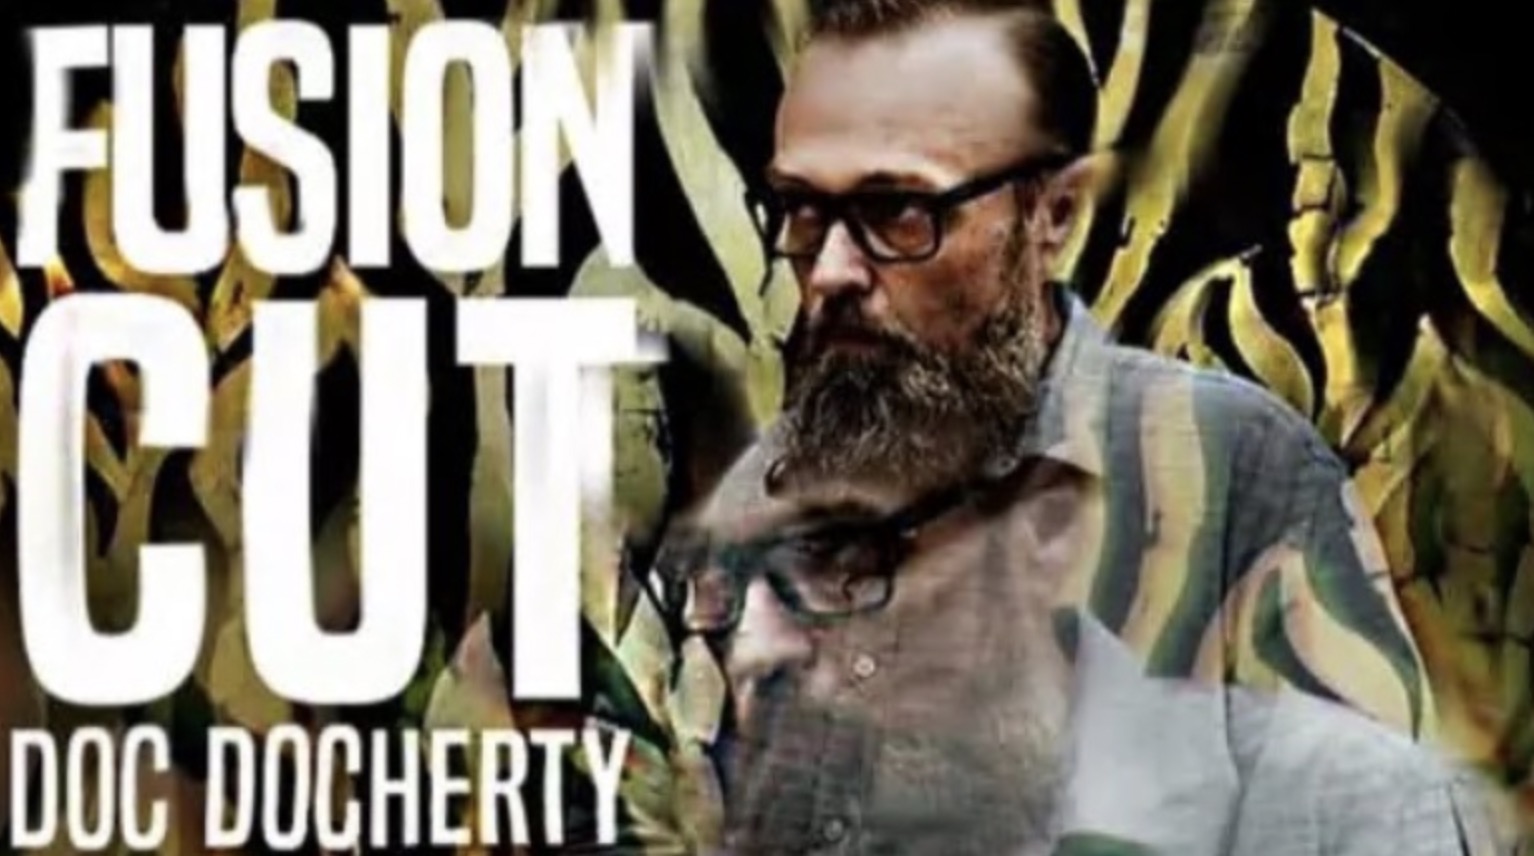 Fusion Cut by Doc Docherty (Mp4 Video Download)